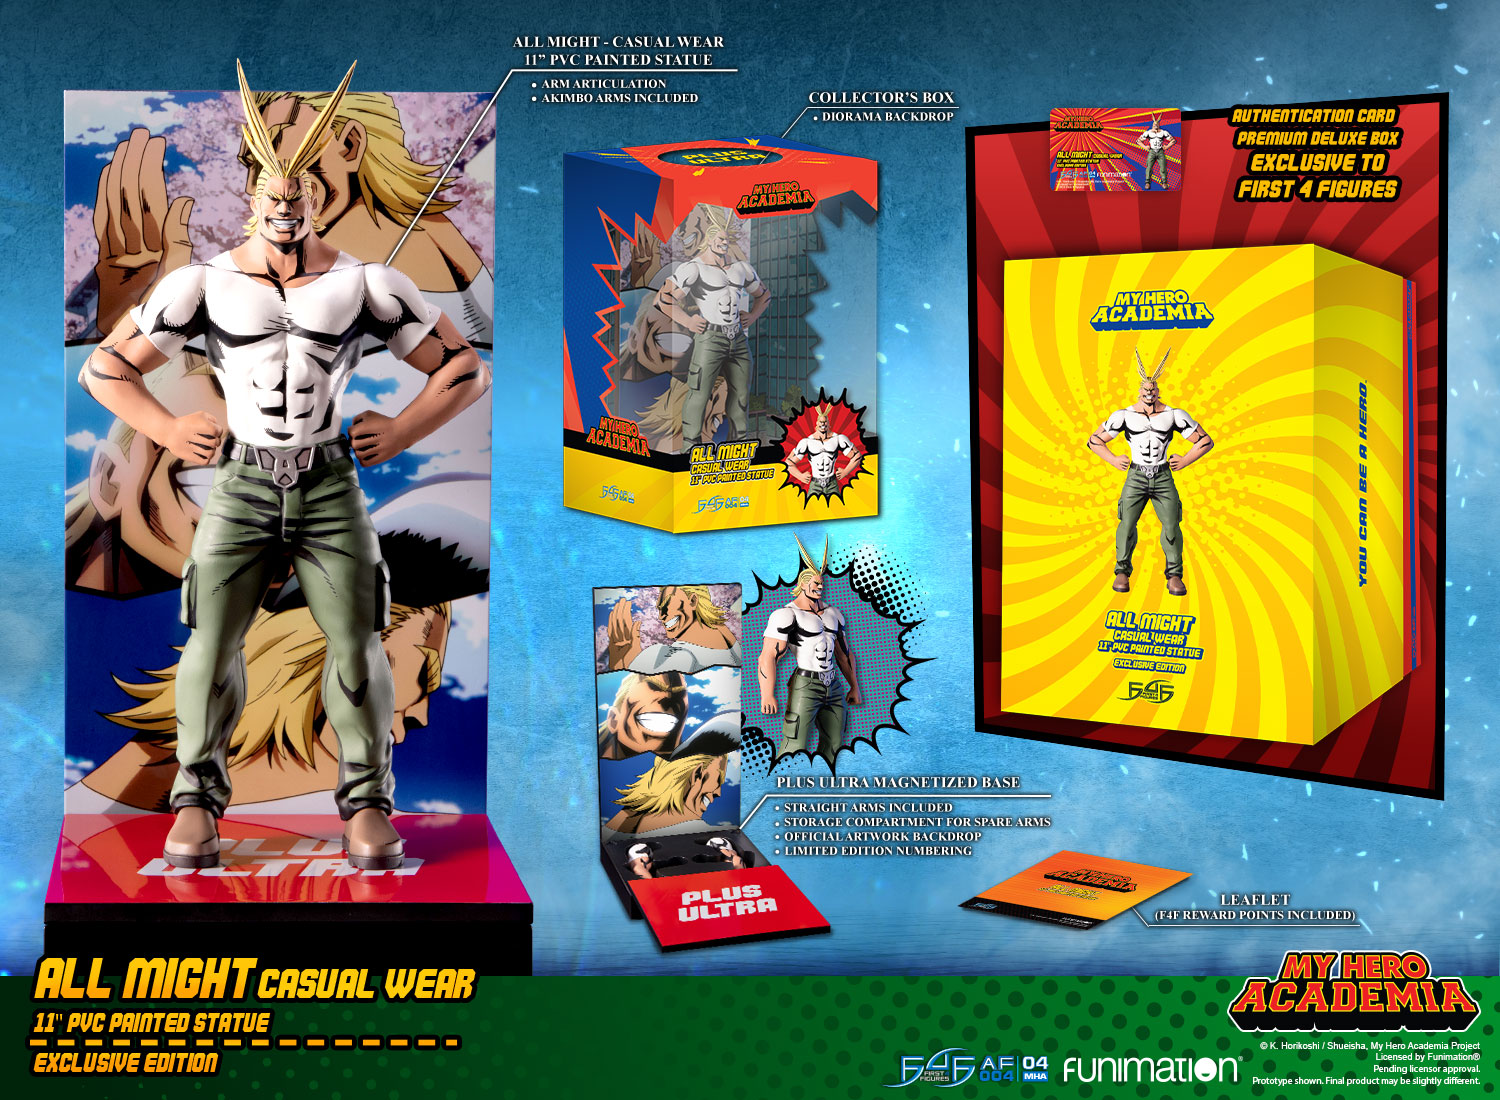 All Might: Casual Wear (Exclusive Edition)